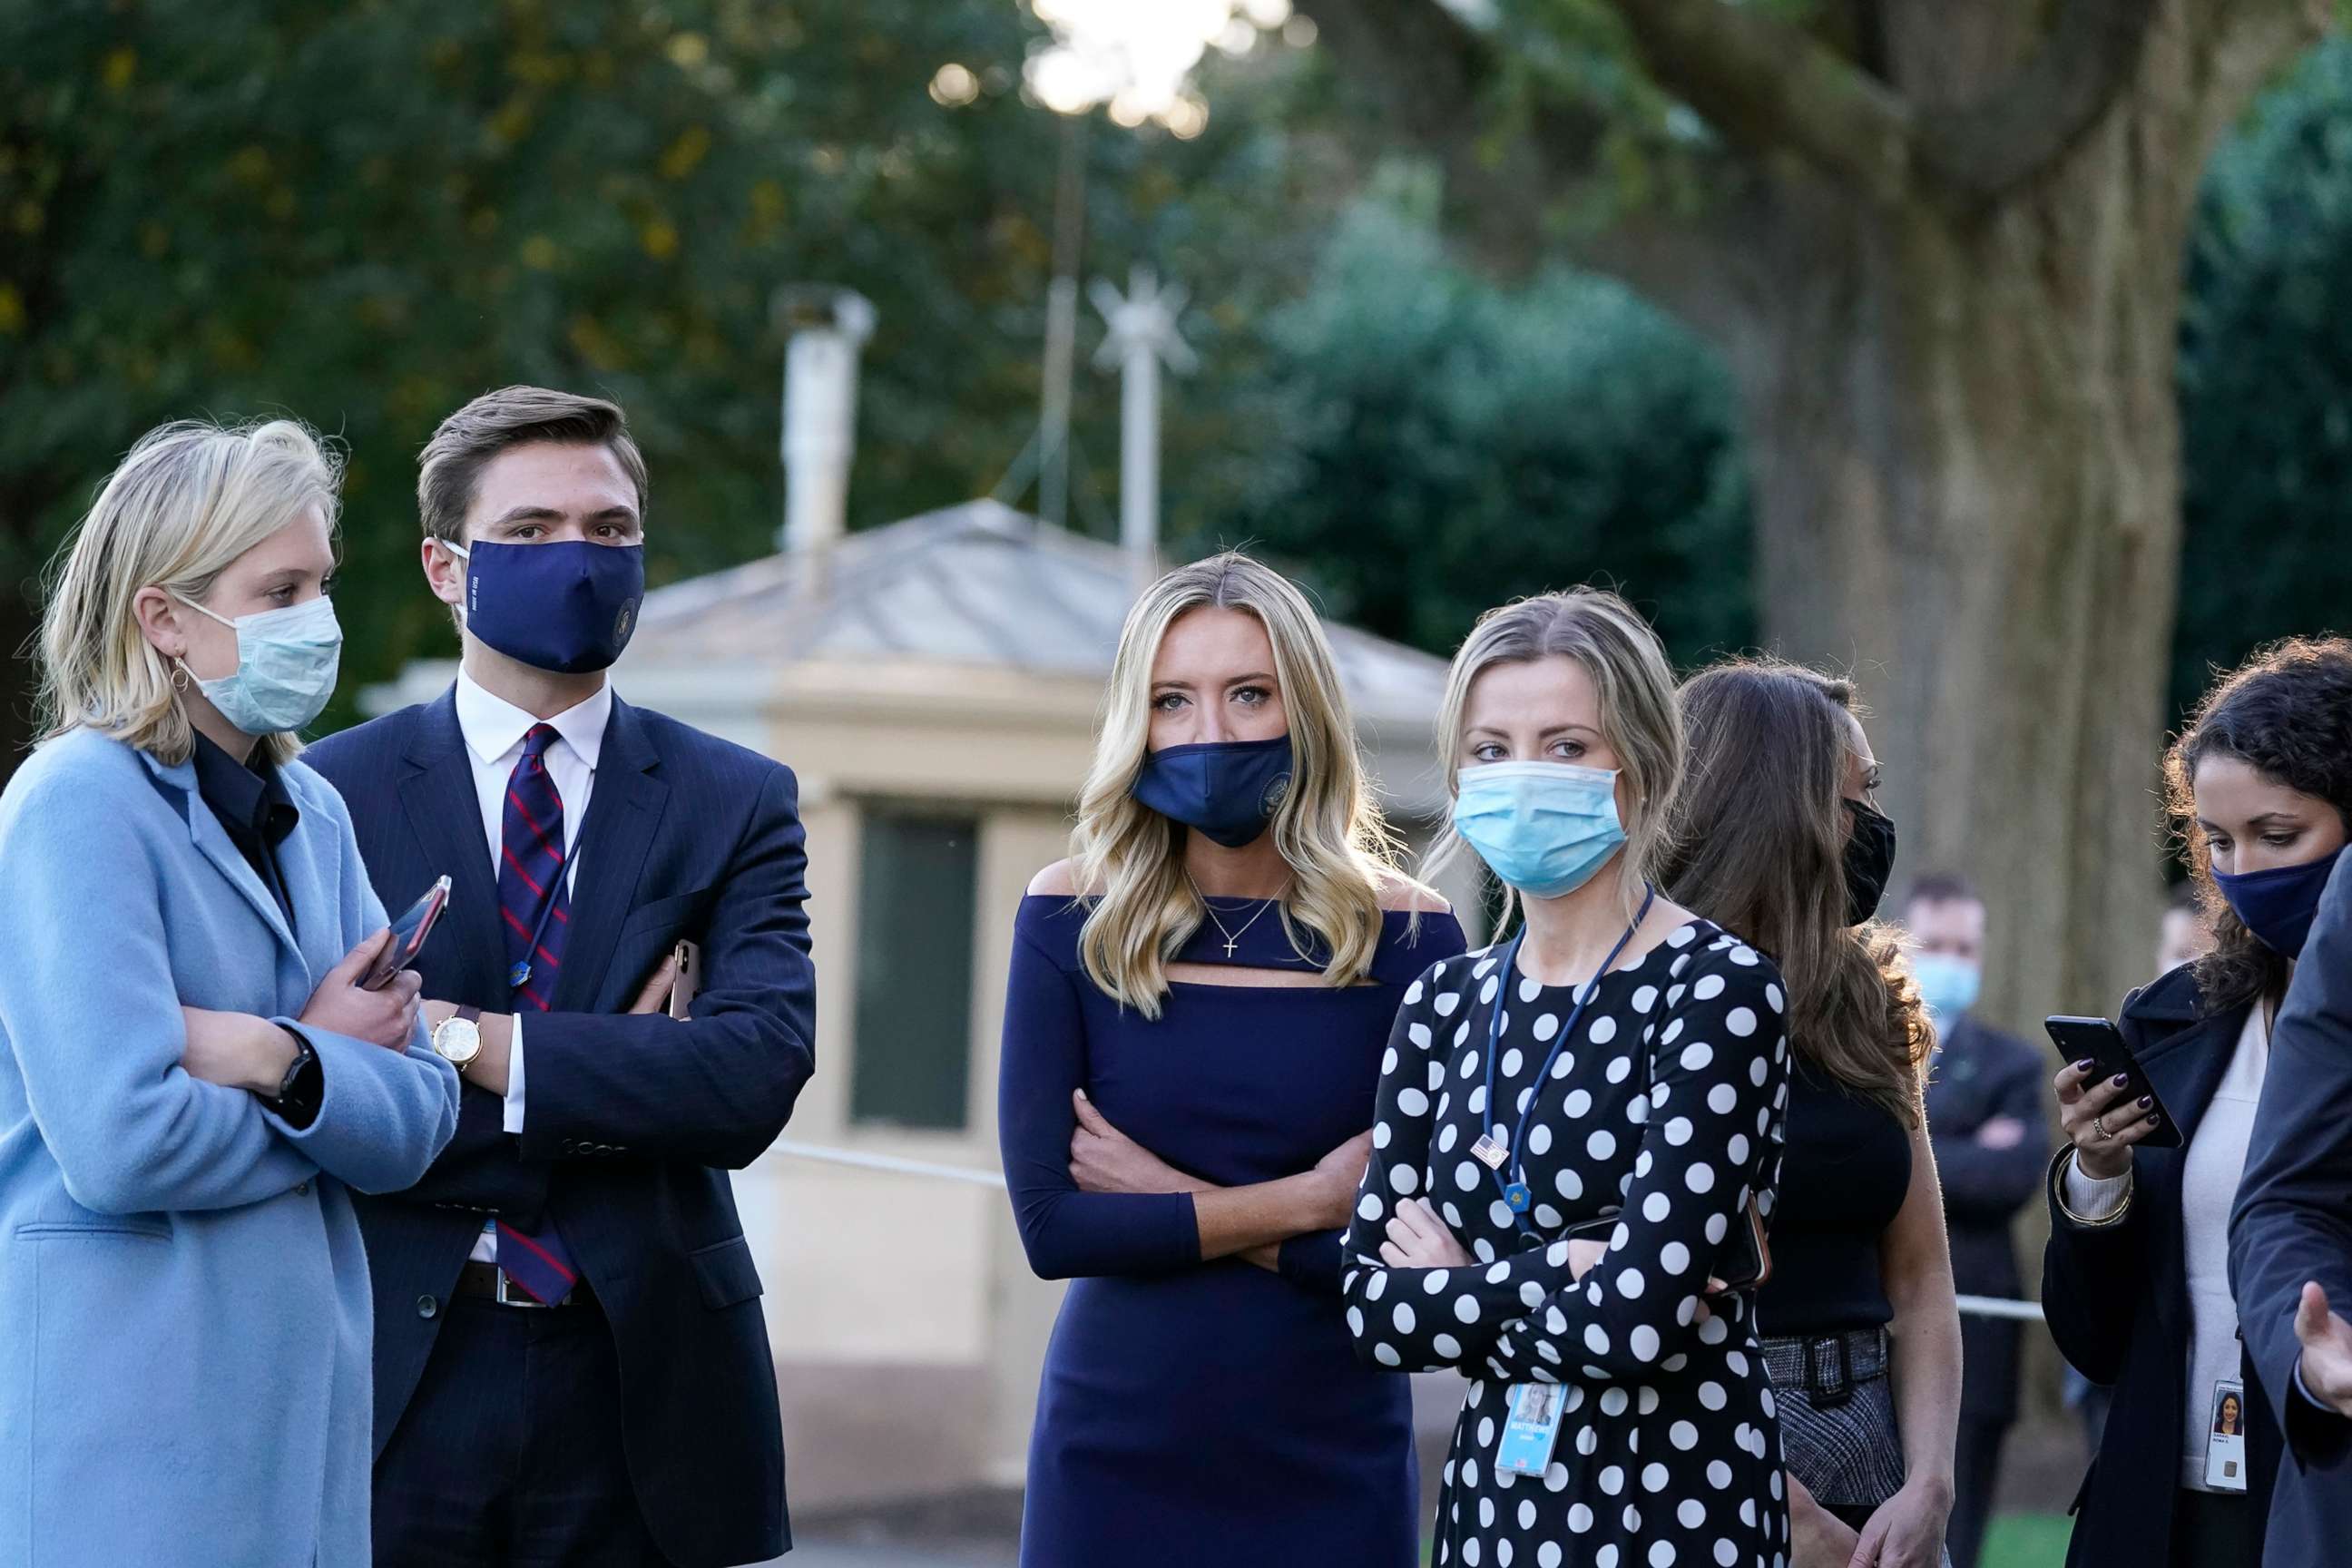 PHOTO: White House press secretary Kayleigh McEnany, third from left, waits with others as President Donald Trump prepares to leave the White House to go to Walter Reed National Military Medical Center after he tested positive for COVID-19, Oct. 2, 2020.